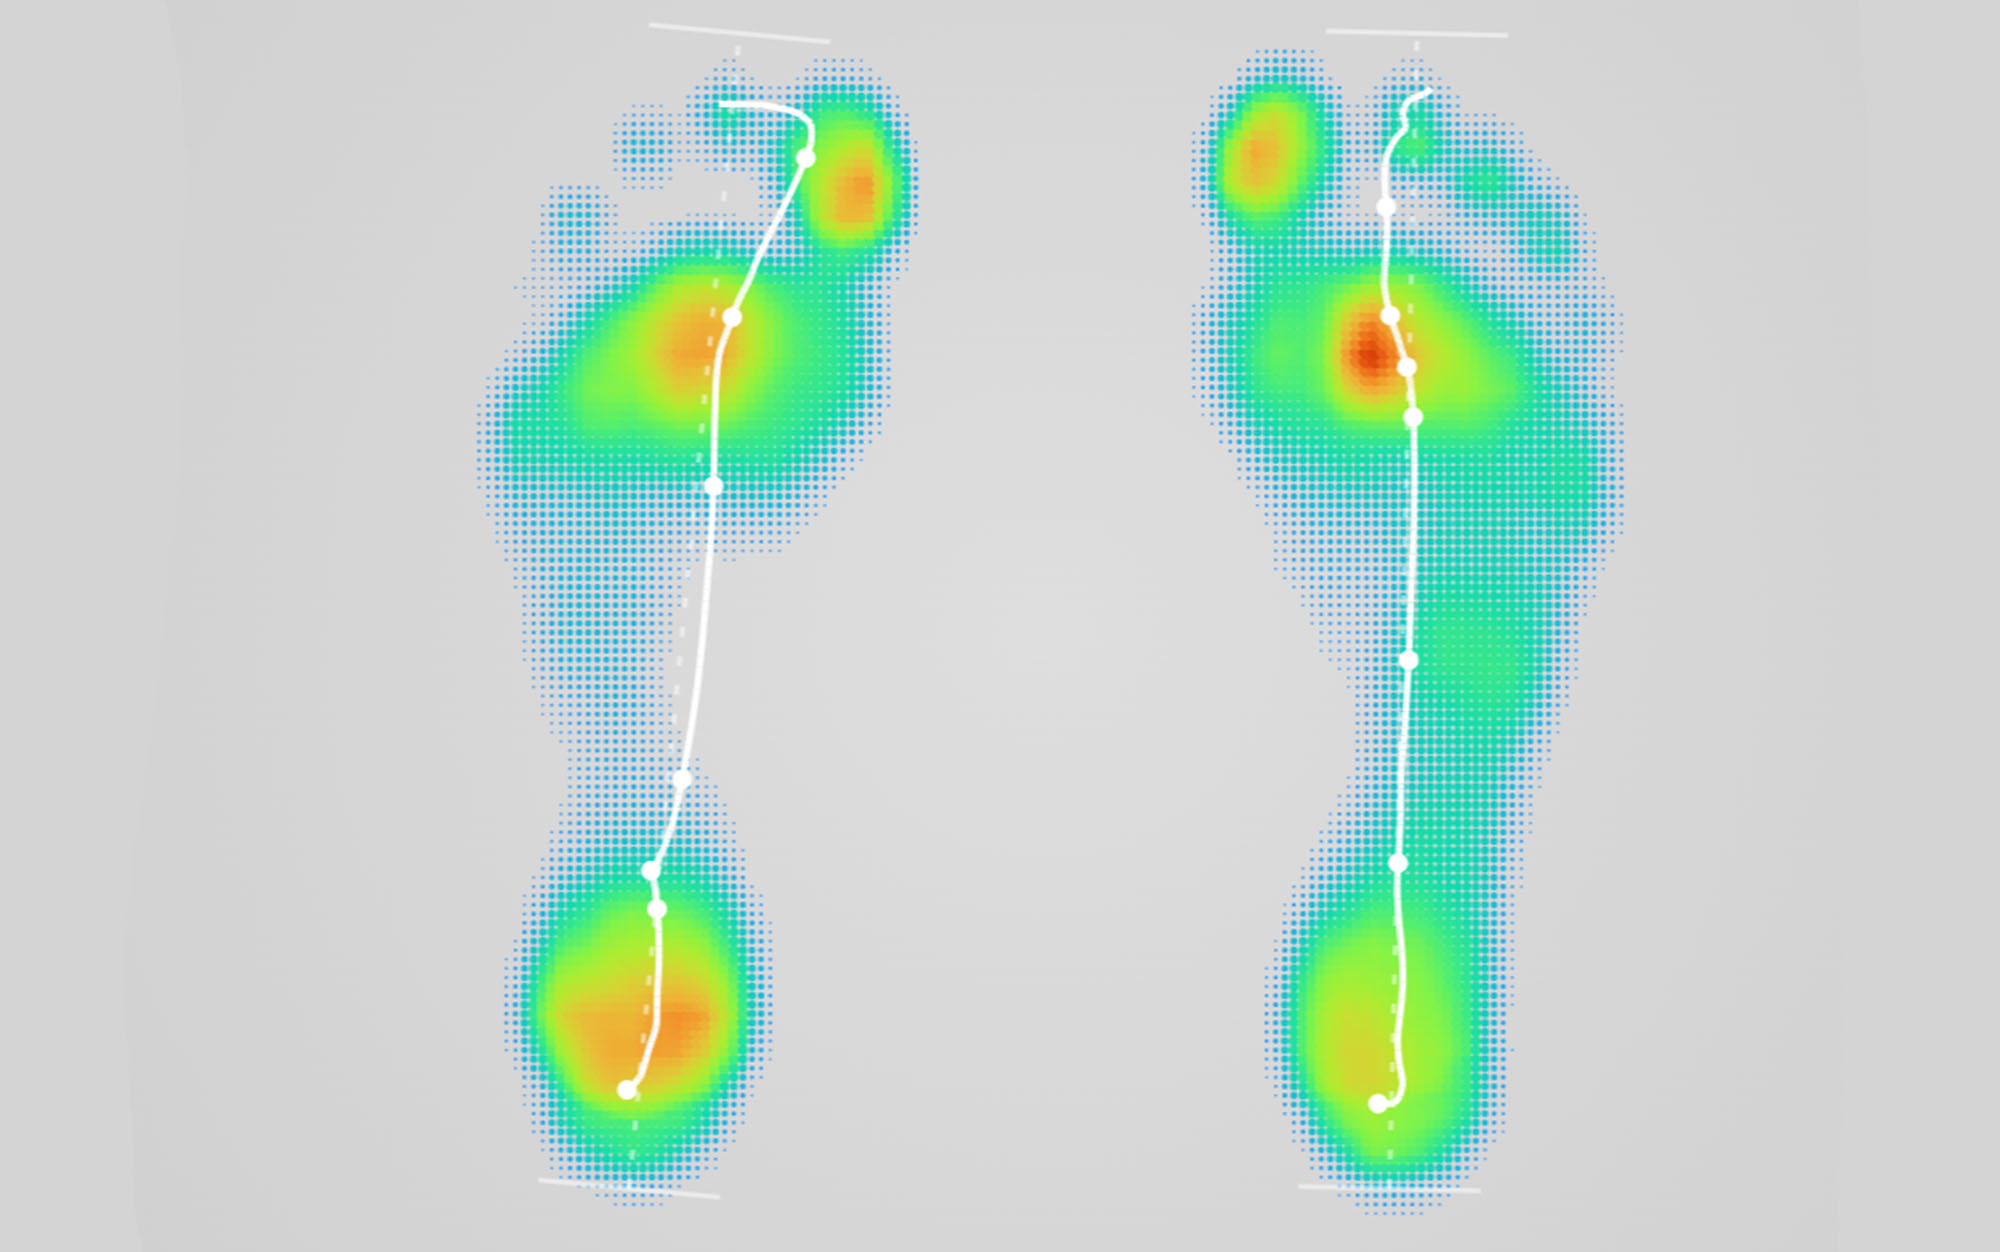 The pressure I place on my feet while walking is indicated here (red being the most pressure and blue being the least). The lines show my foot angle and direction while walking.